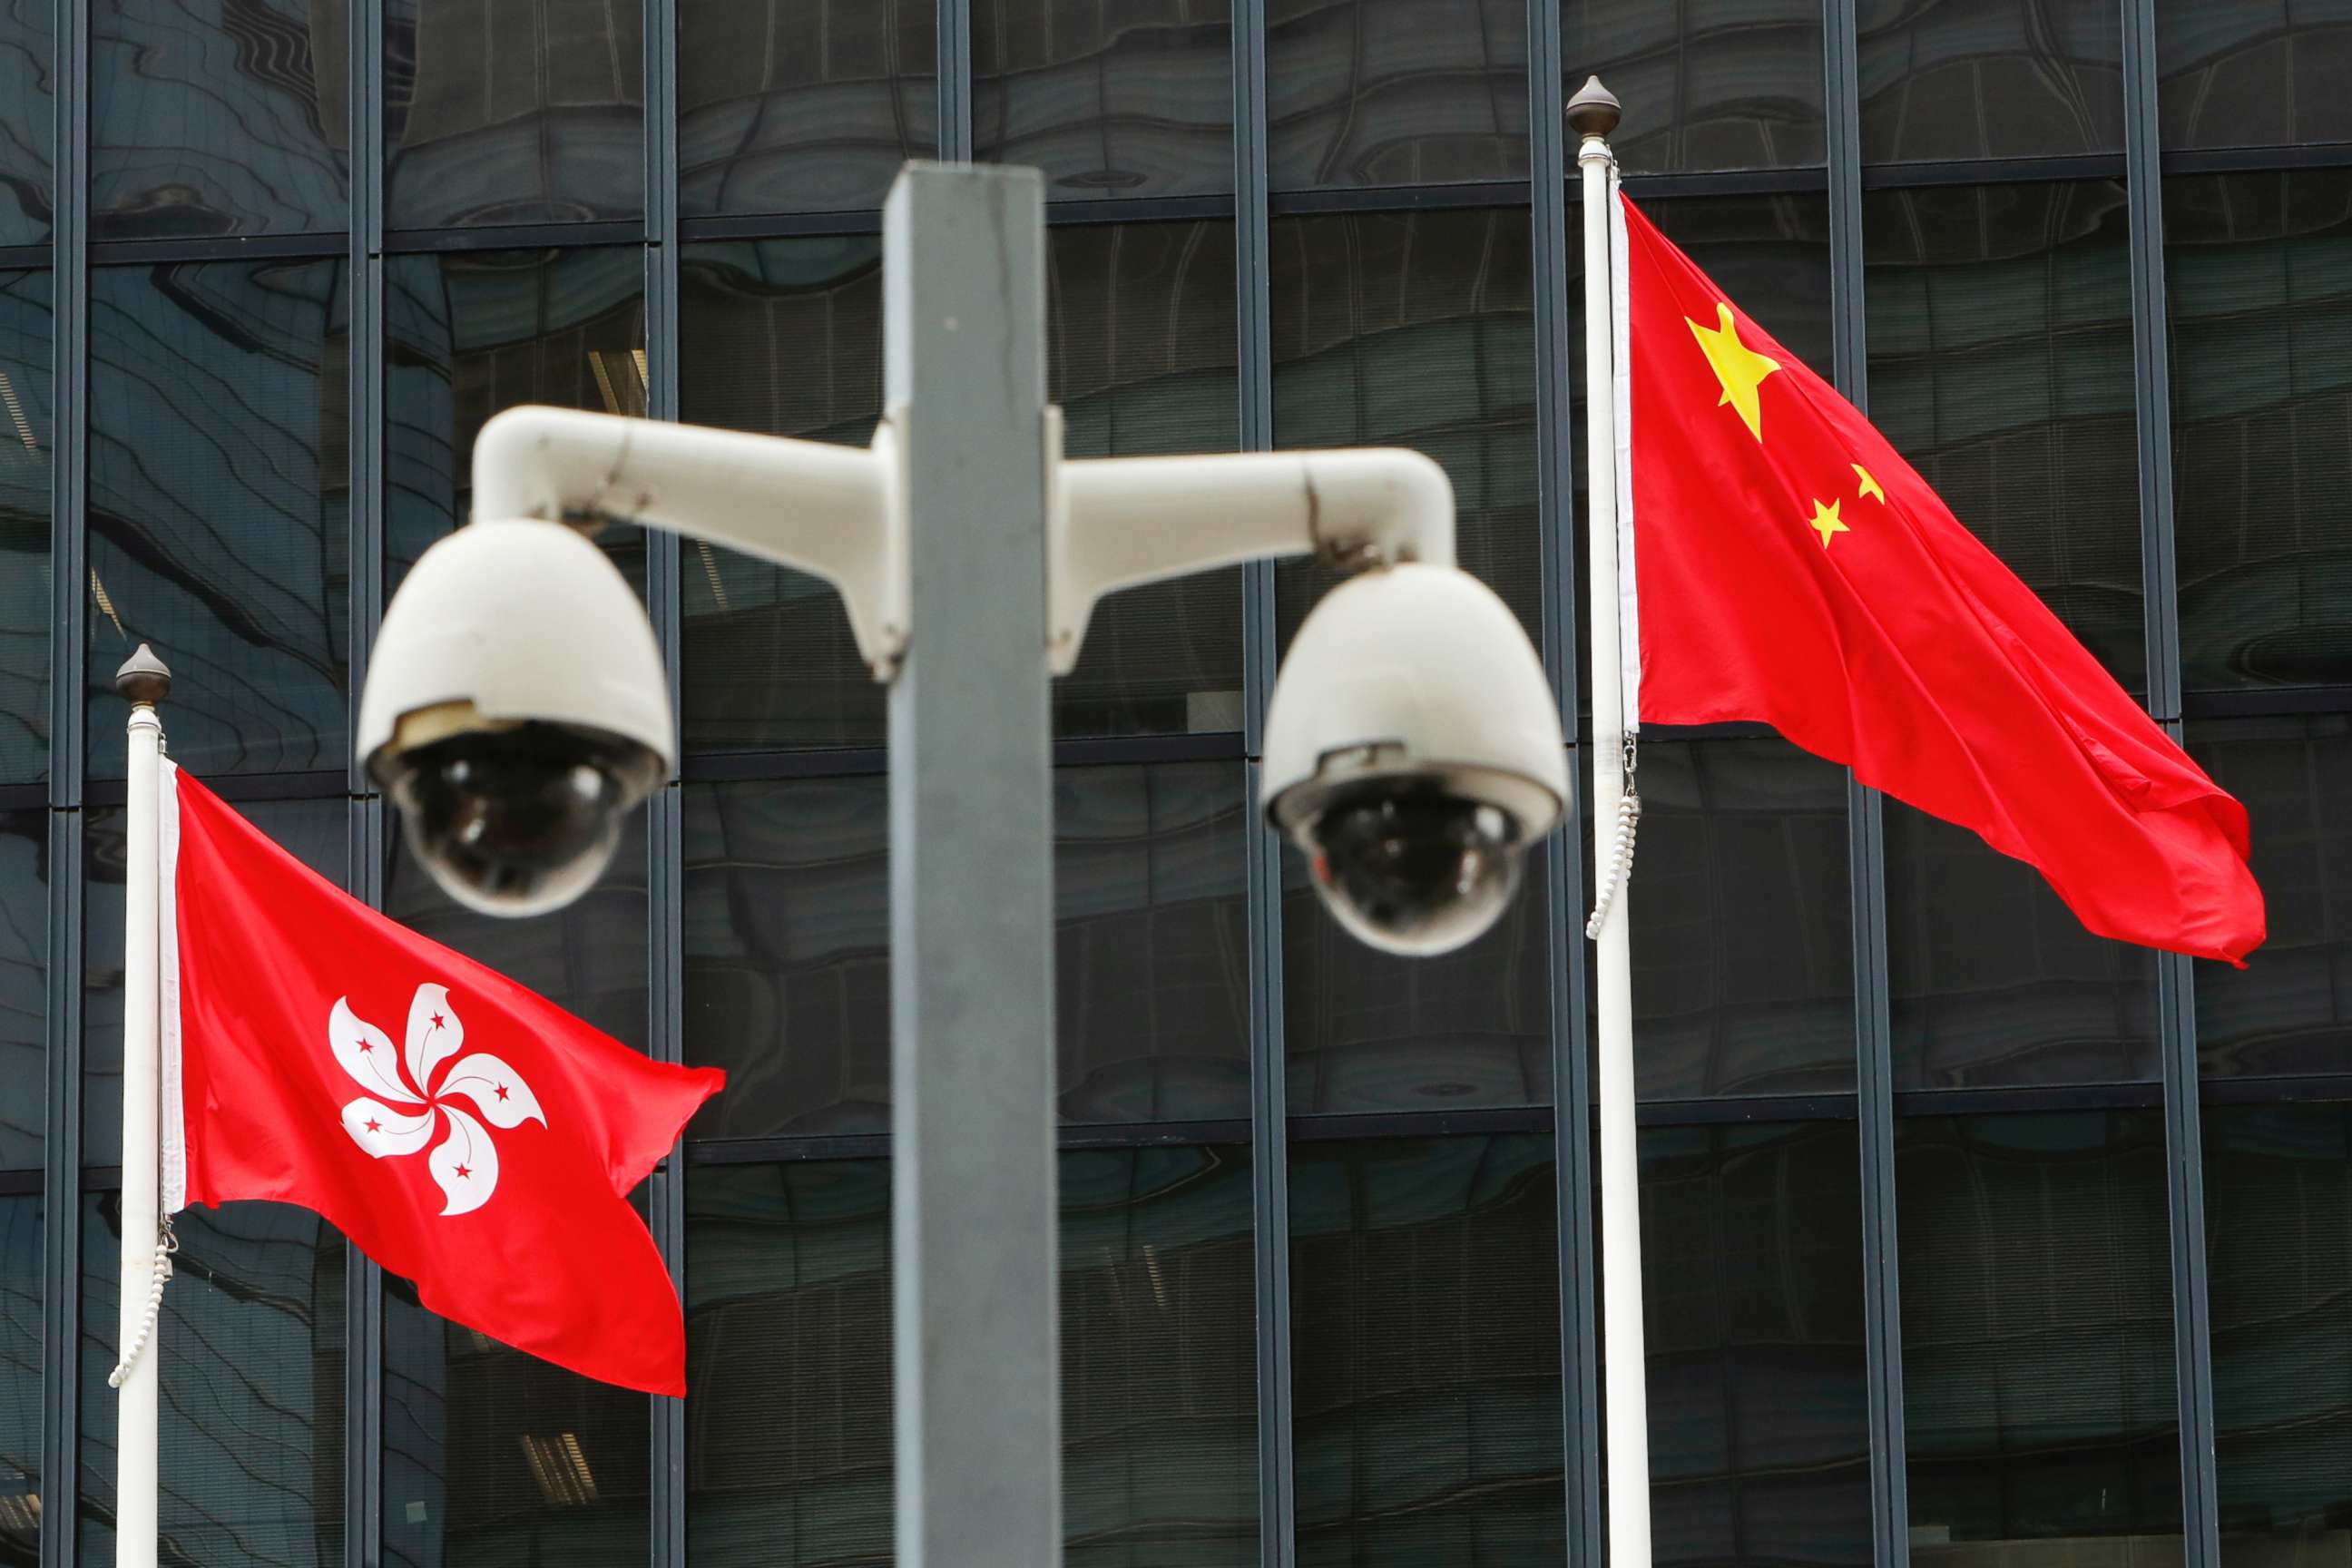 FILE PHOTO: Hong Kong and Chinese national flags are flown behind a pair of surveillance cameras outside the Central Government Offices in Hong Kong, China July 20, 2020.